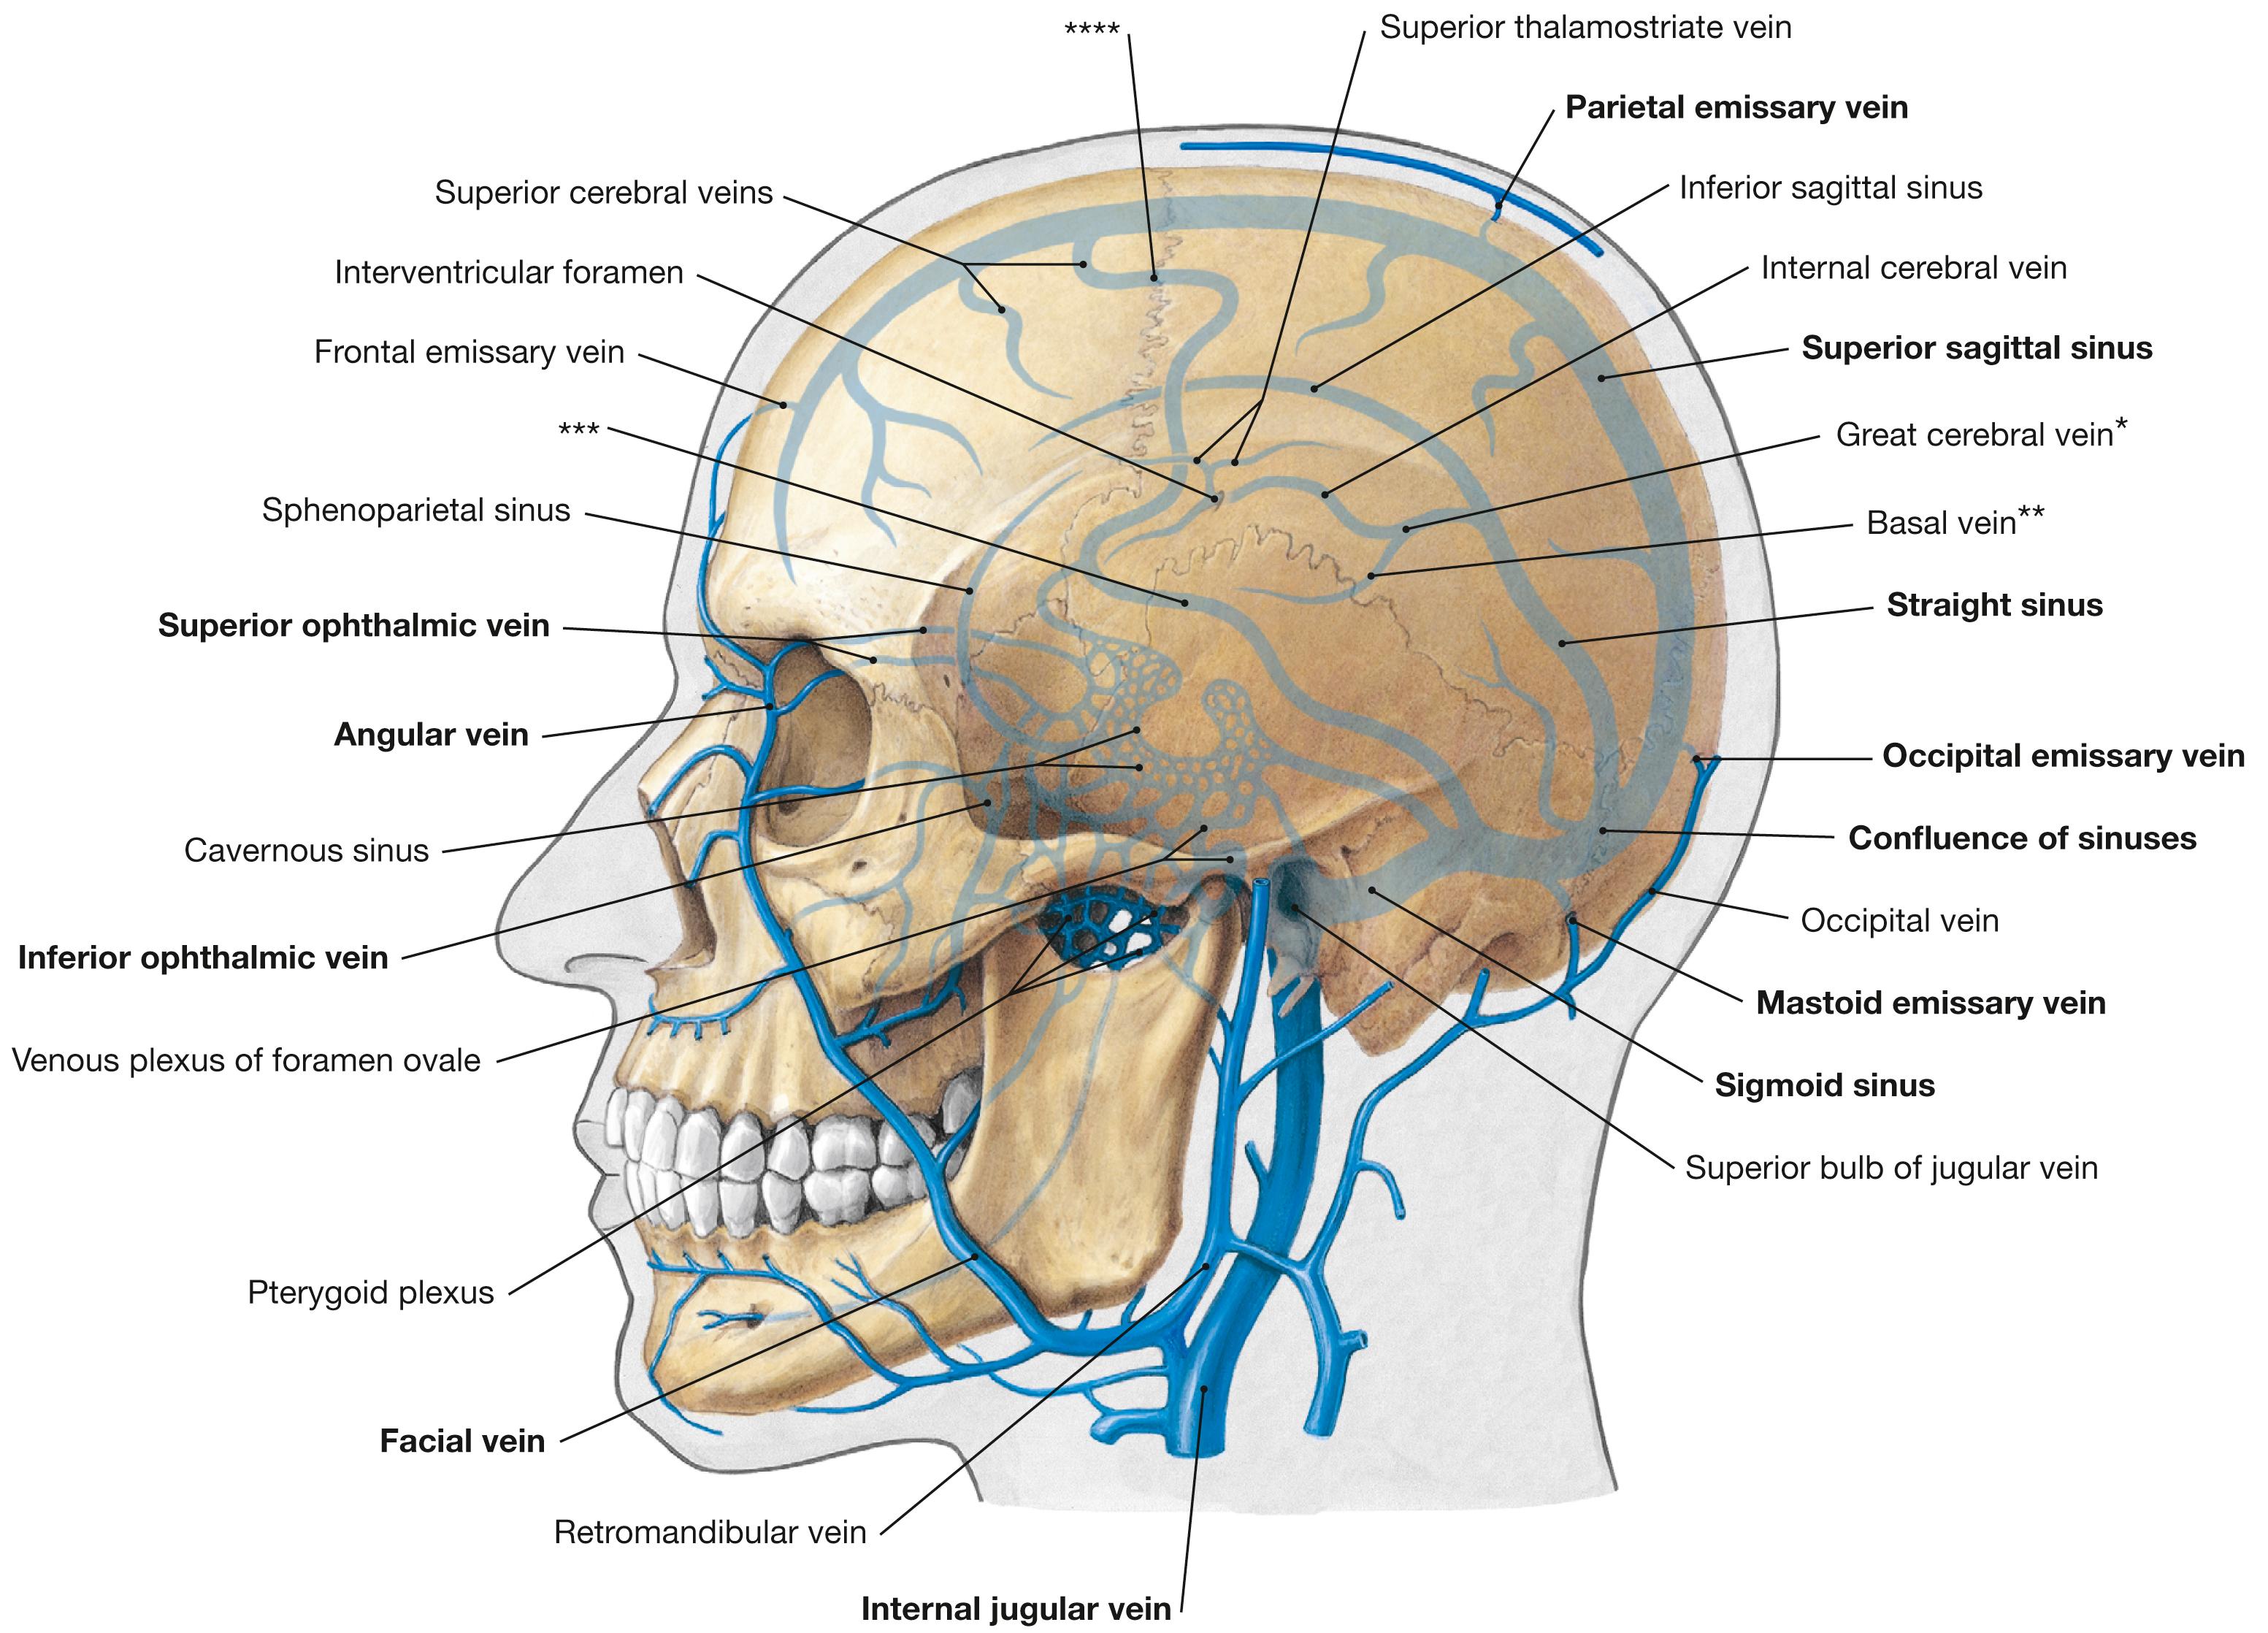 Fig. 12.11, Intra- and extracranial veins of the head.